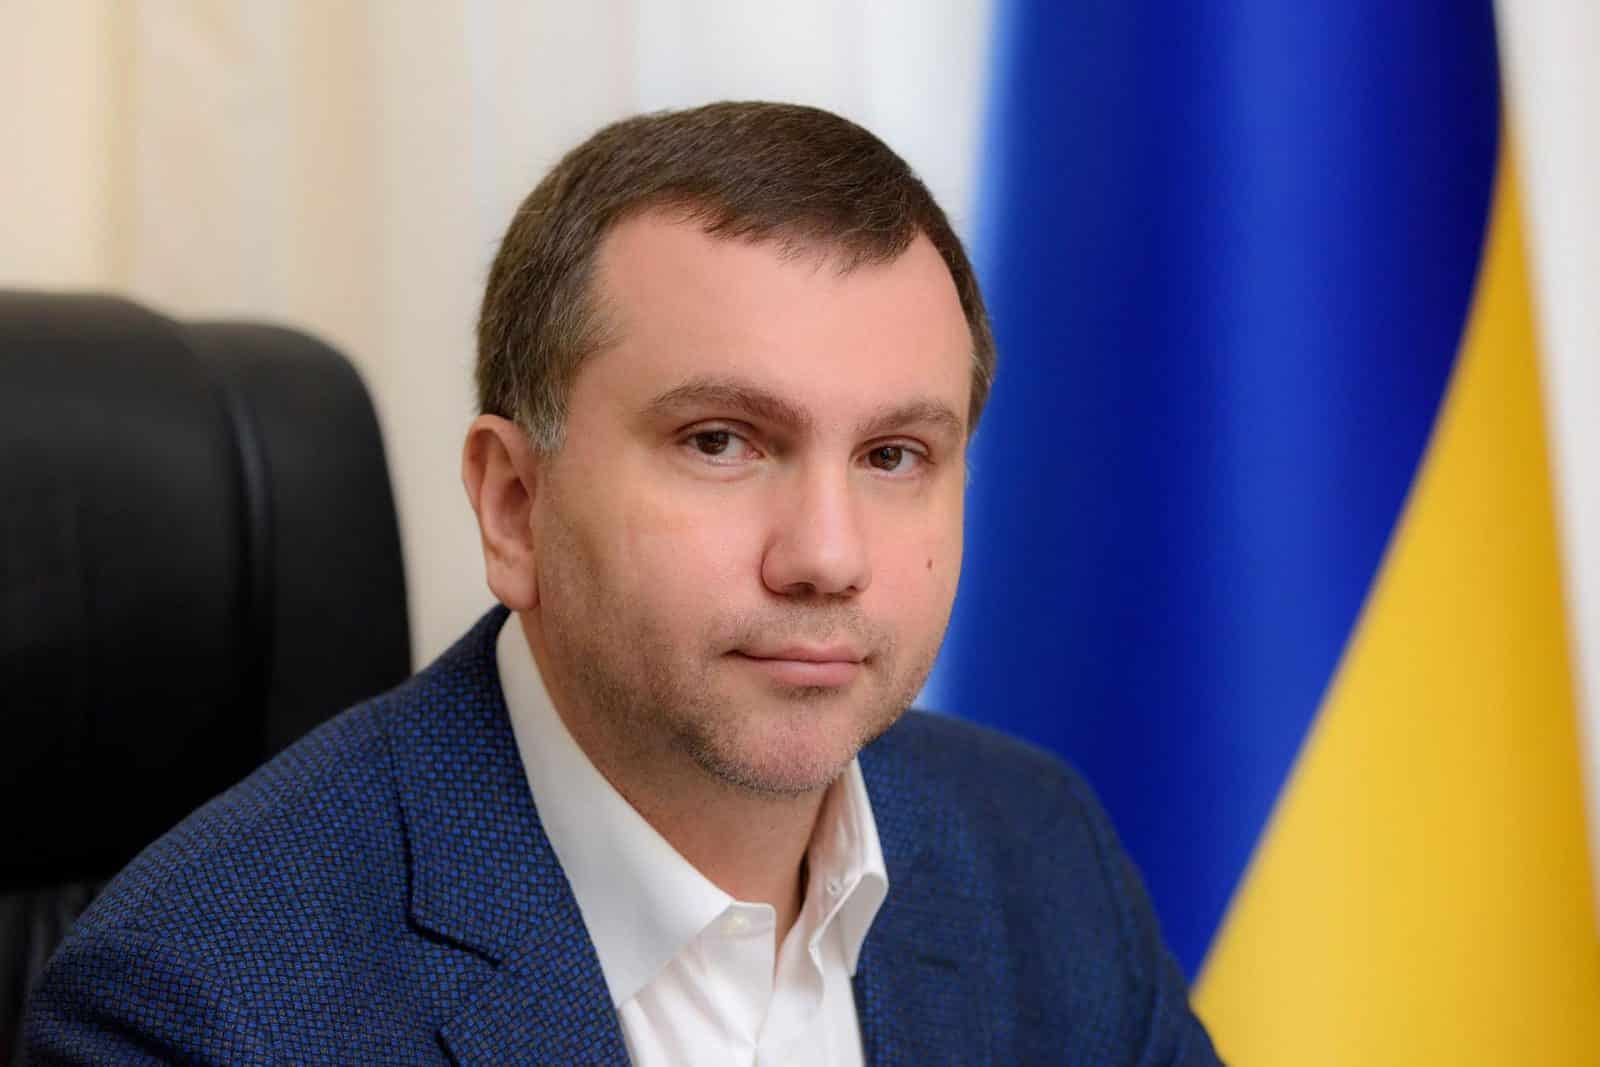 USA imposed sanctions on the Chairman of the District Administrative Court of Kyiv